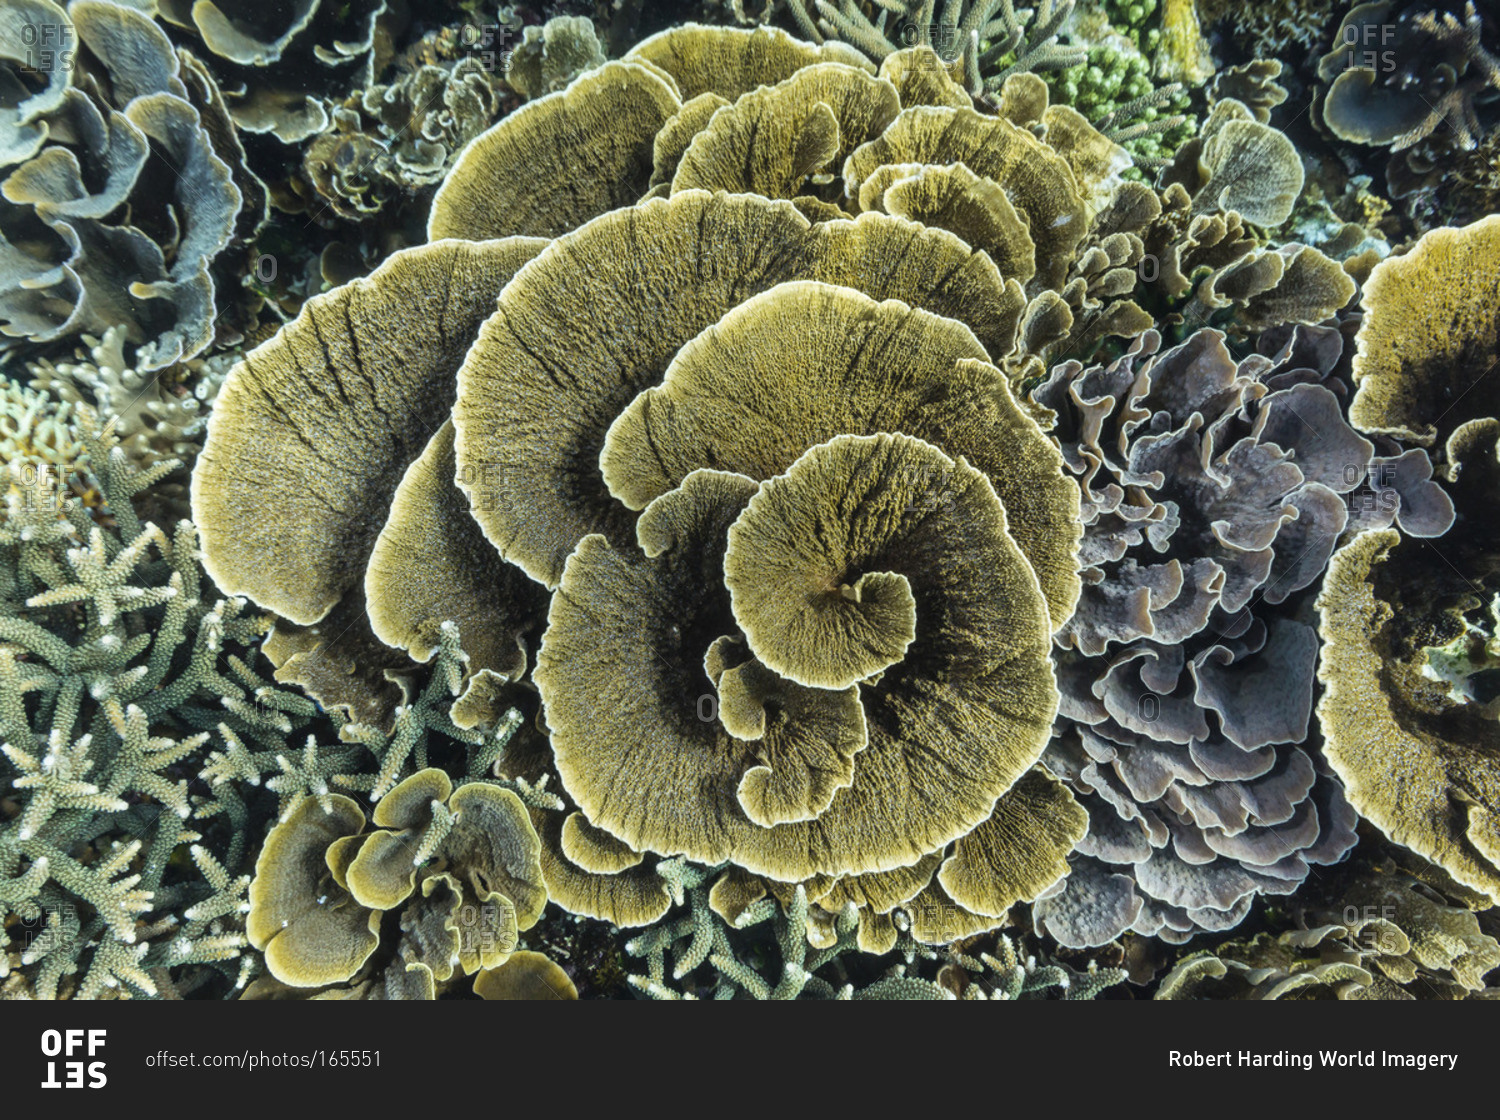 A profusion of hard and soft coral underwater on Siaba Kecil, Komodo Island National Park, Indonesia